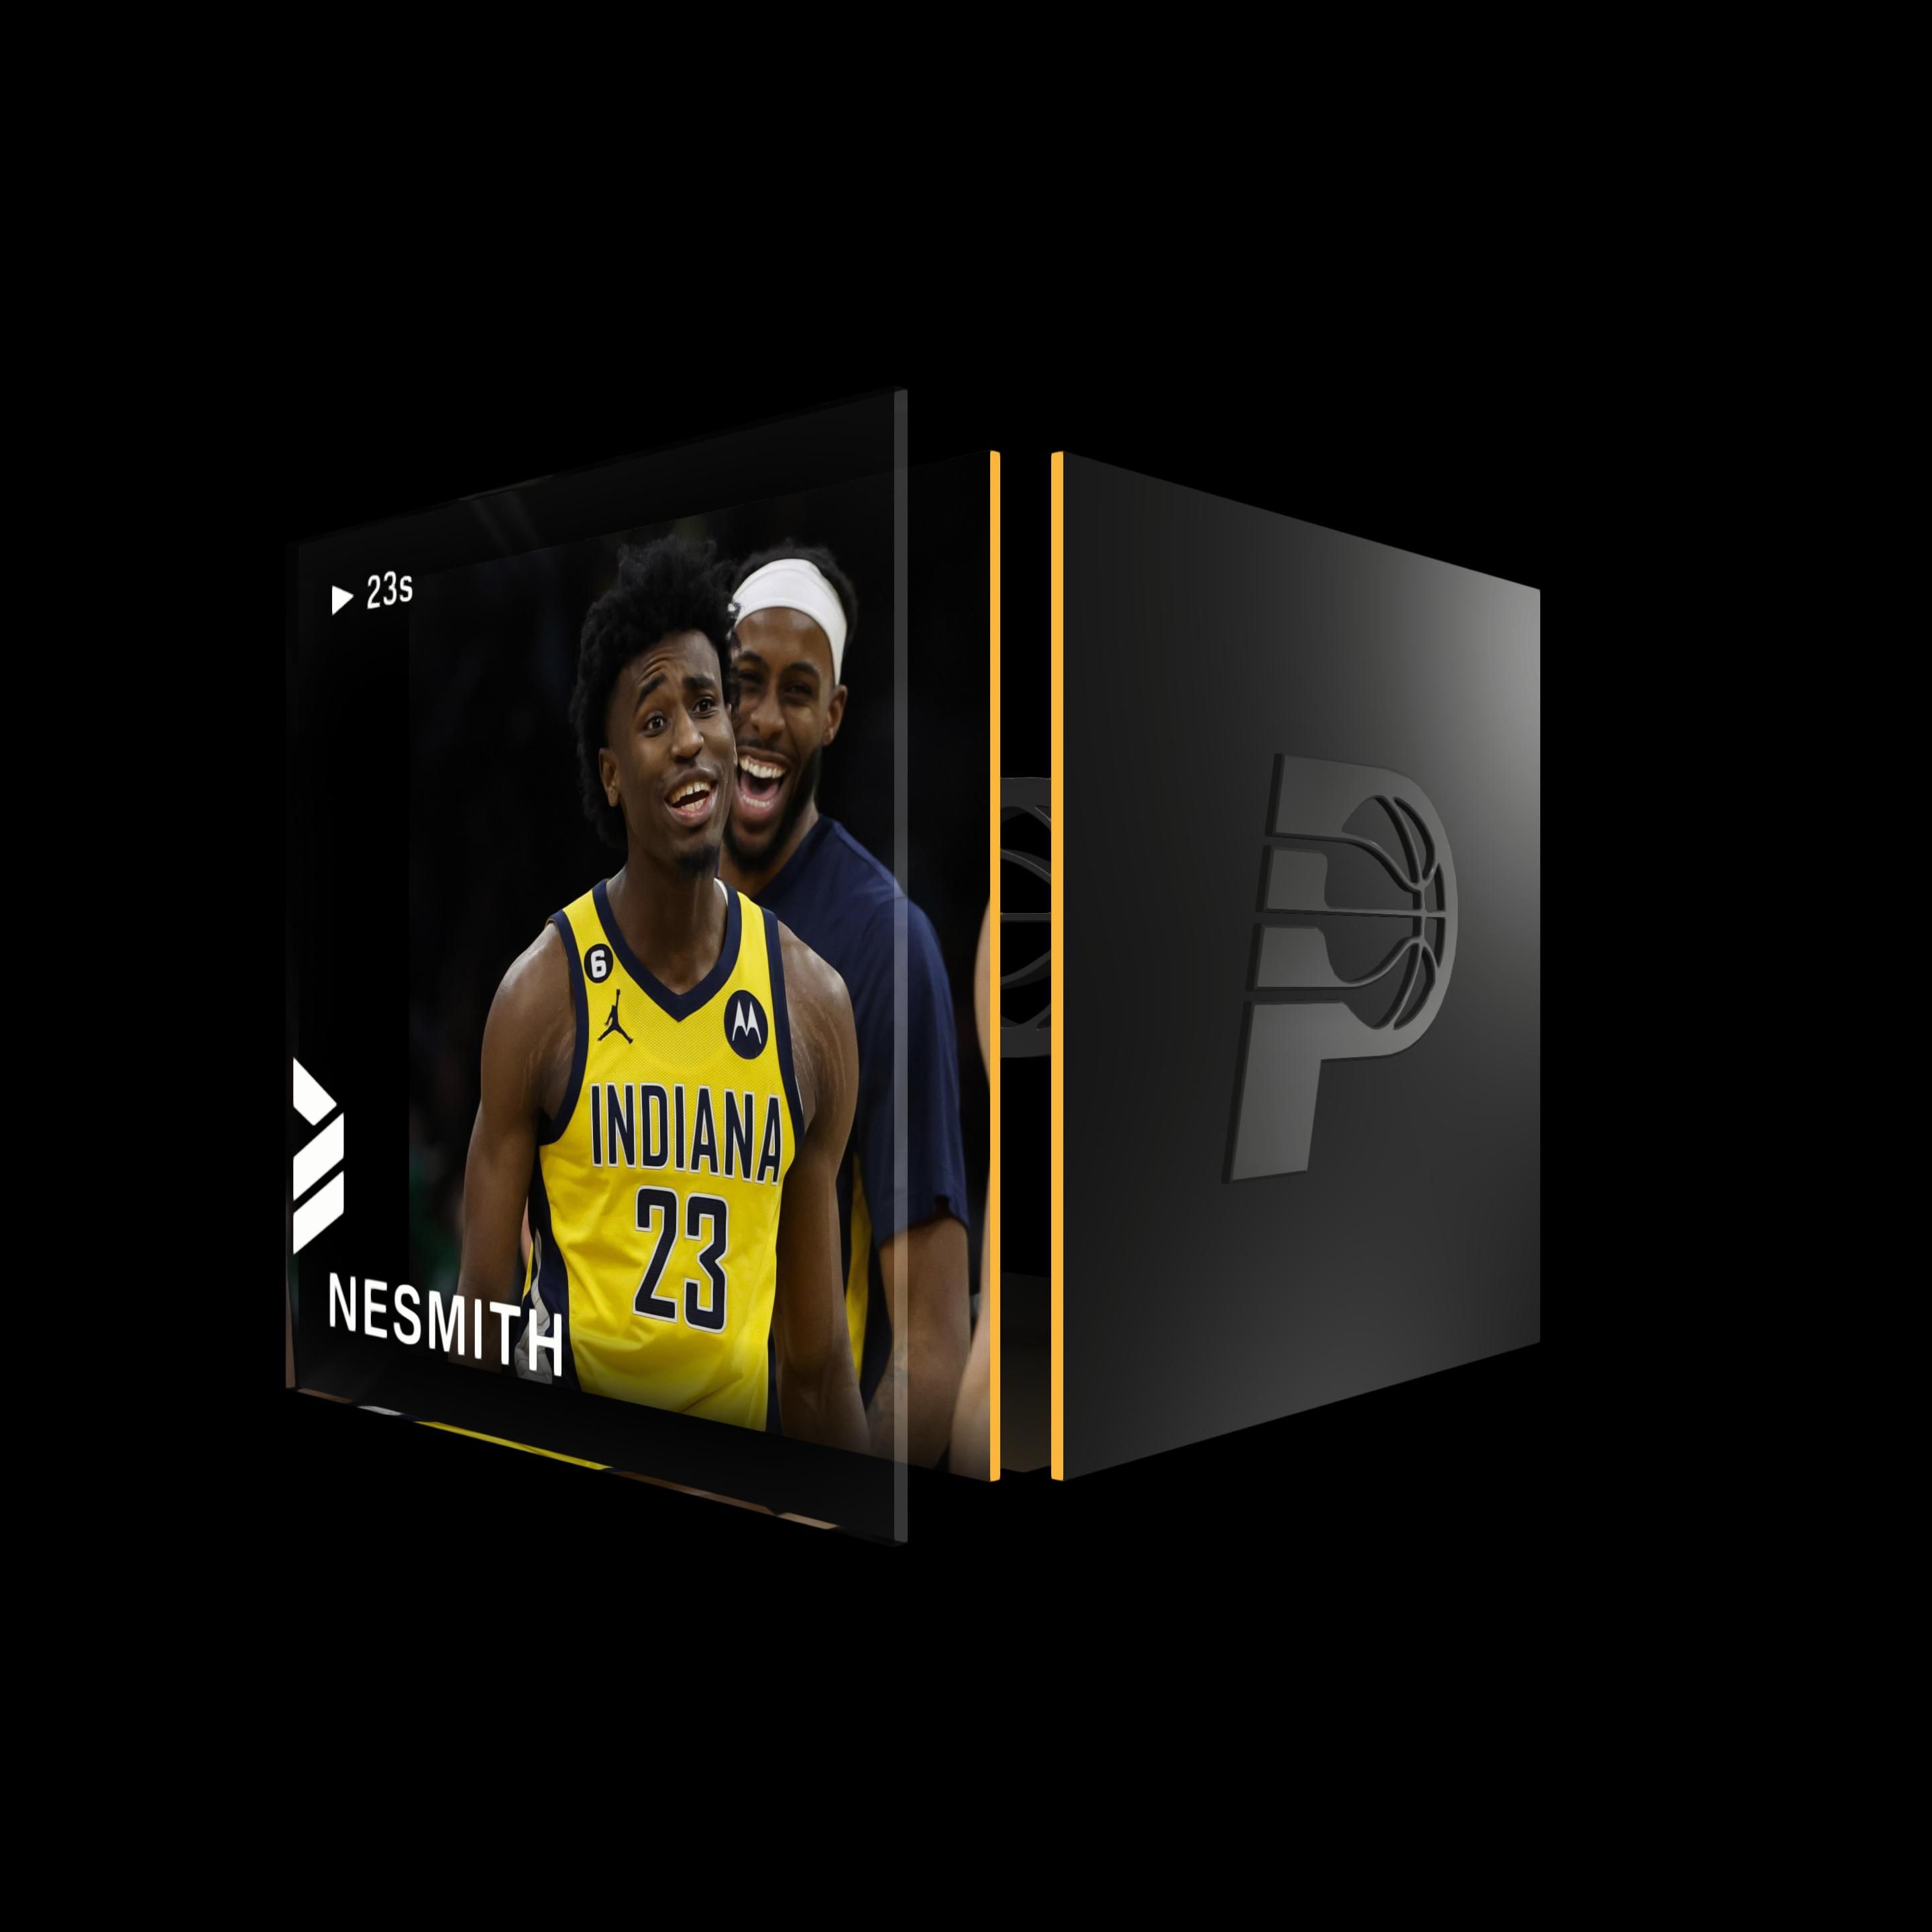 Aaron Nesmith 23 Indiana Pacers basketball player poster shirt